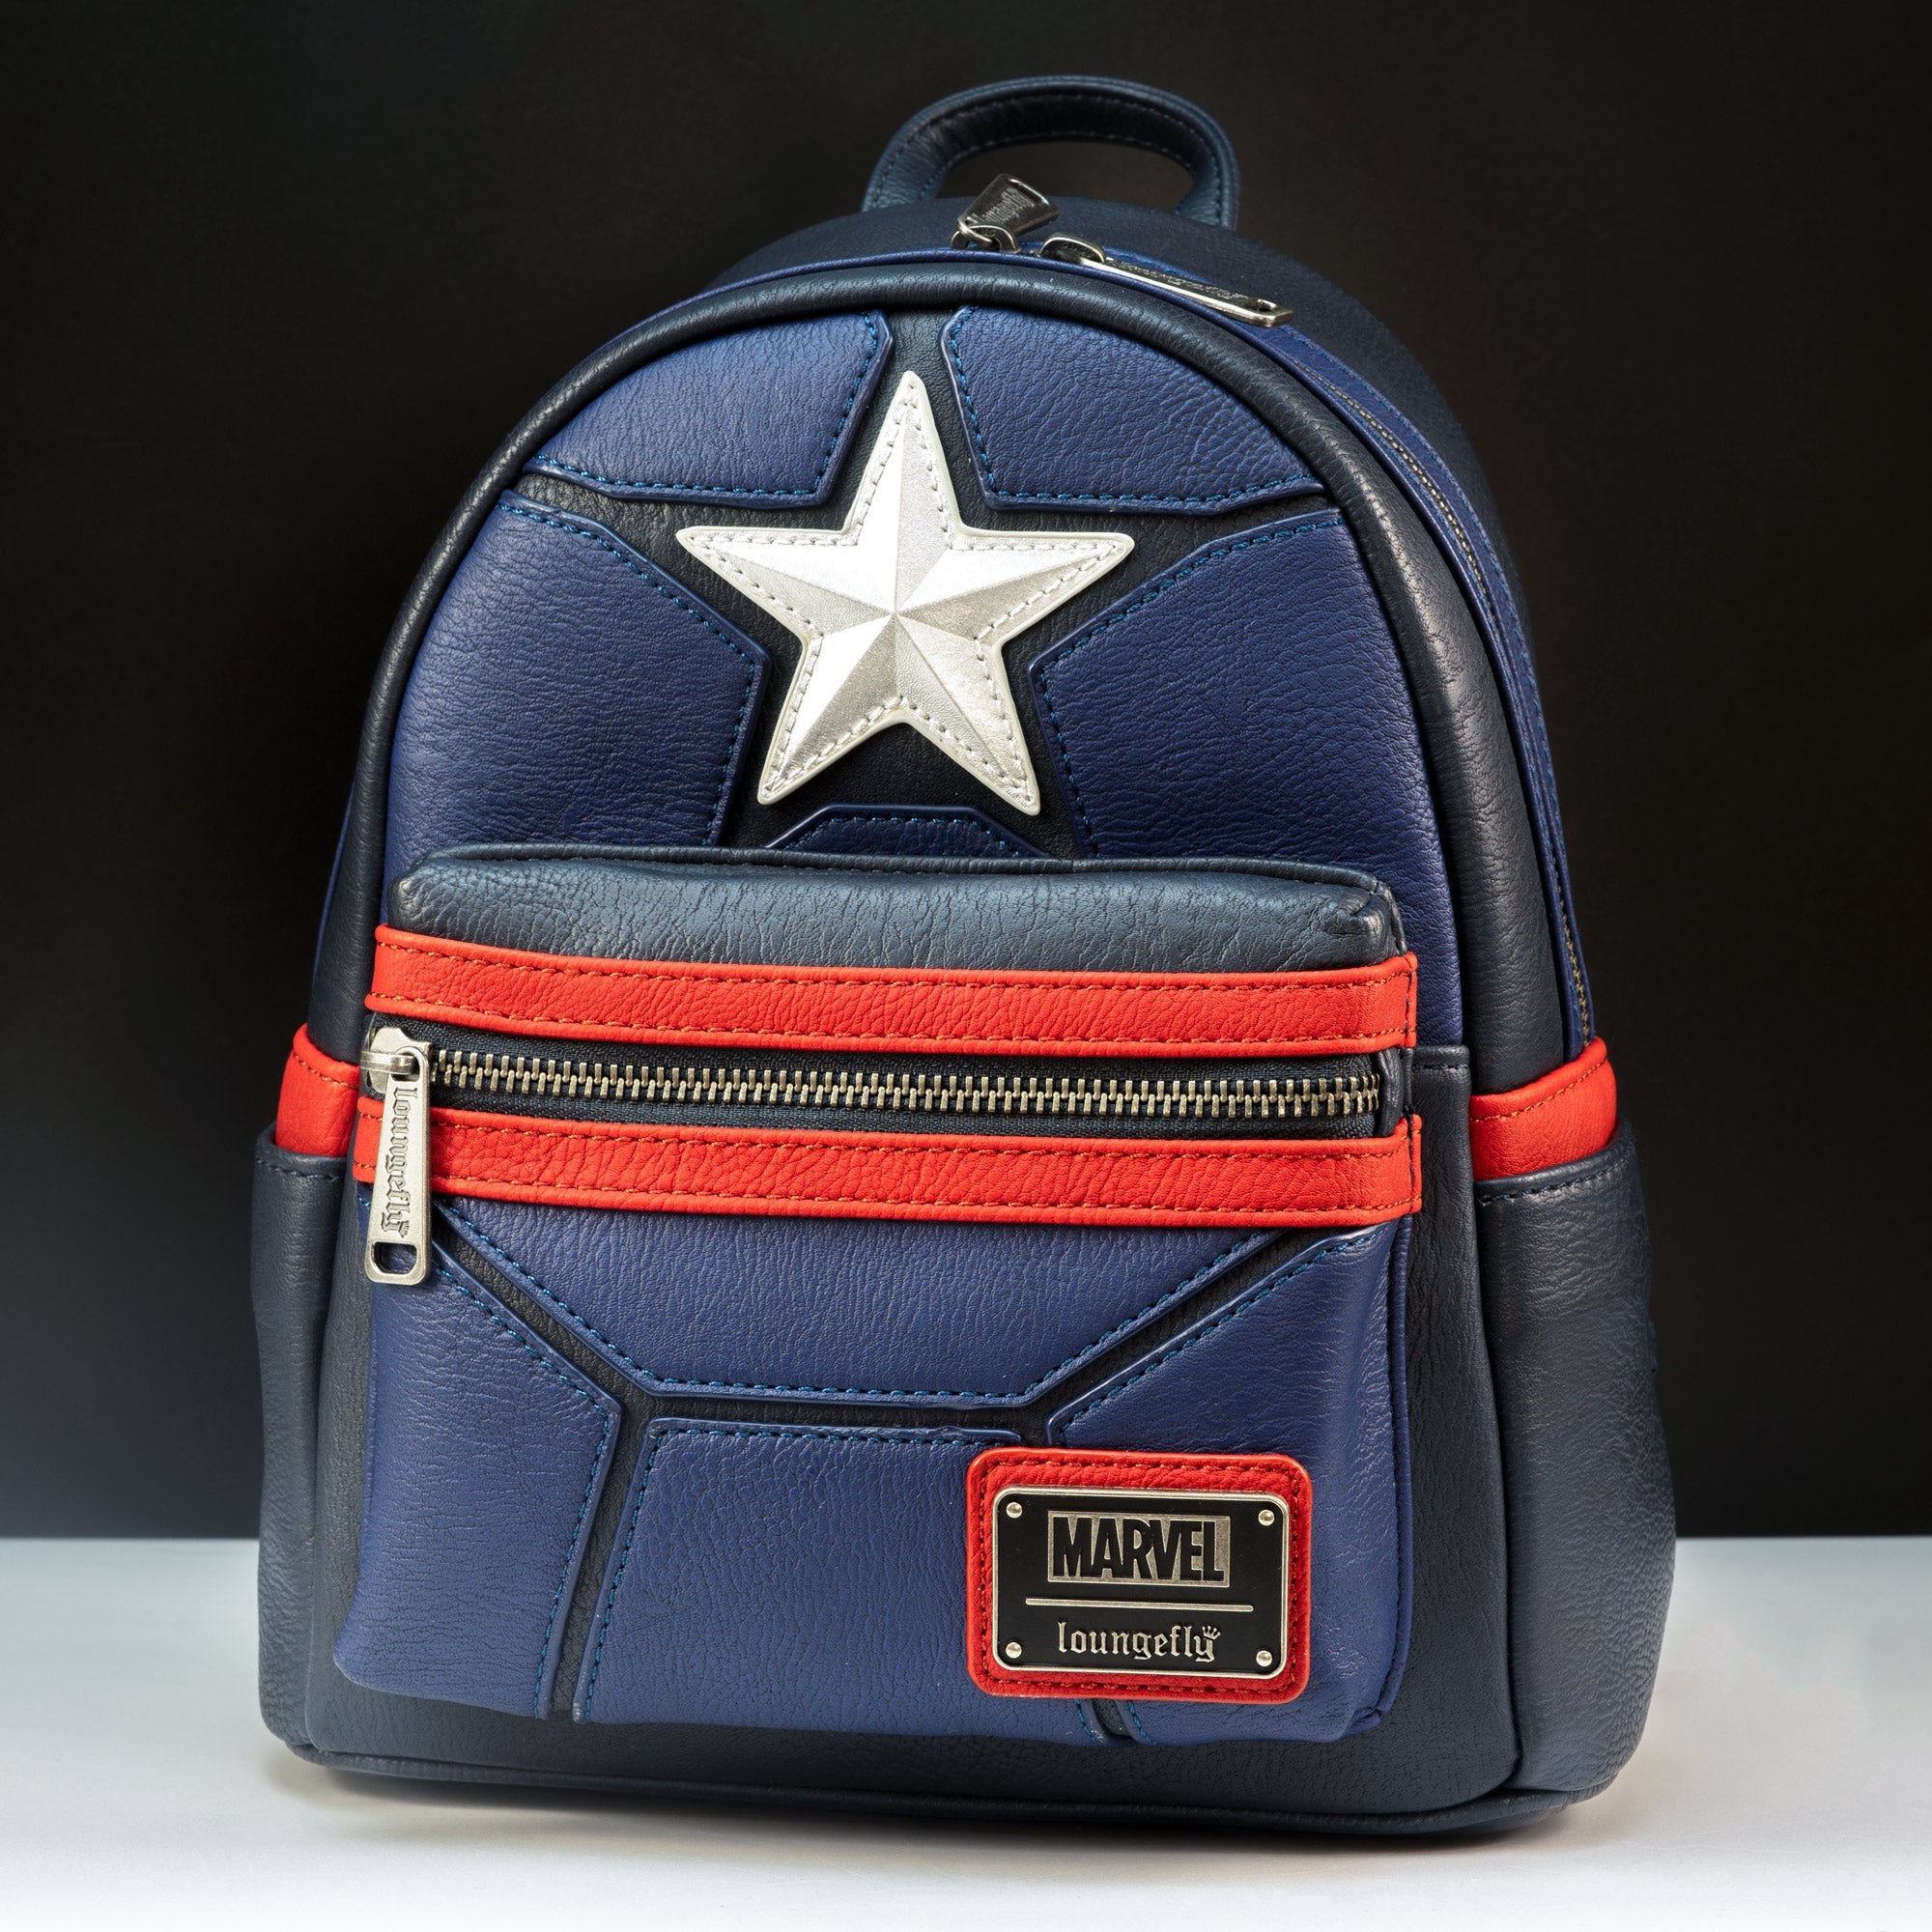 Loungefly x Marvel Captain America Cosplay Mini Backpack - GeekCore